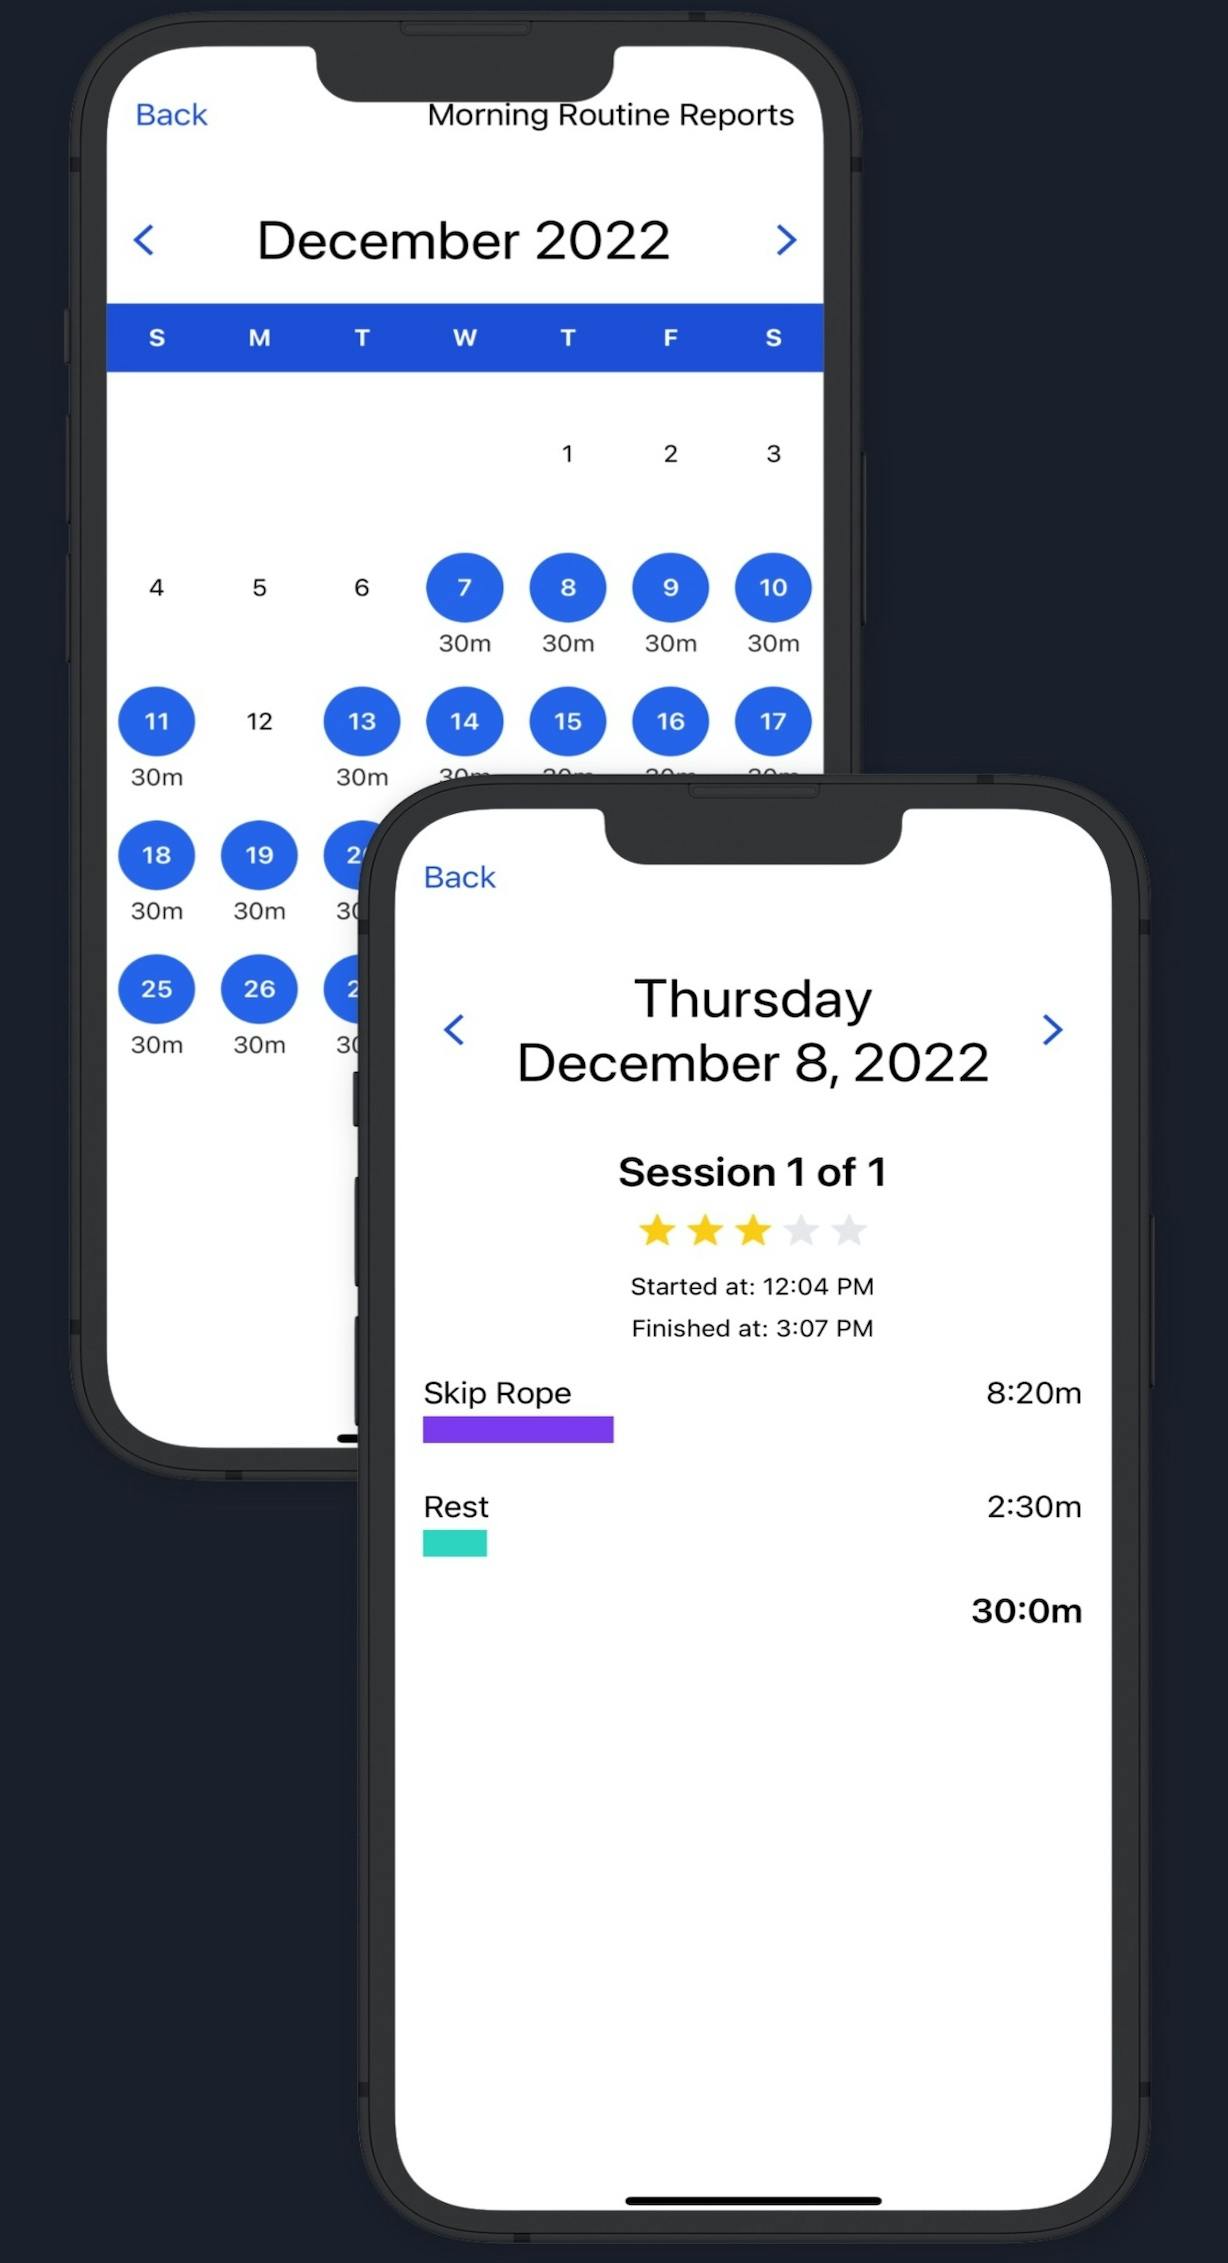 TimersLabs Interval Timer App Reports and Goals with Calendar